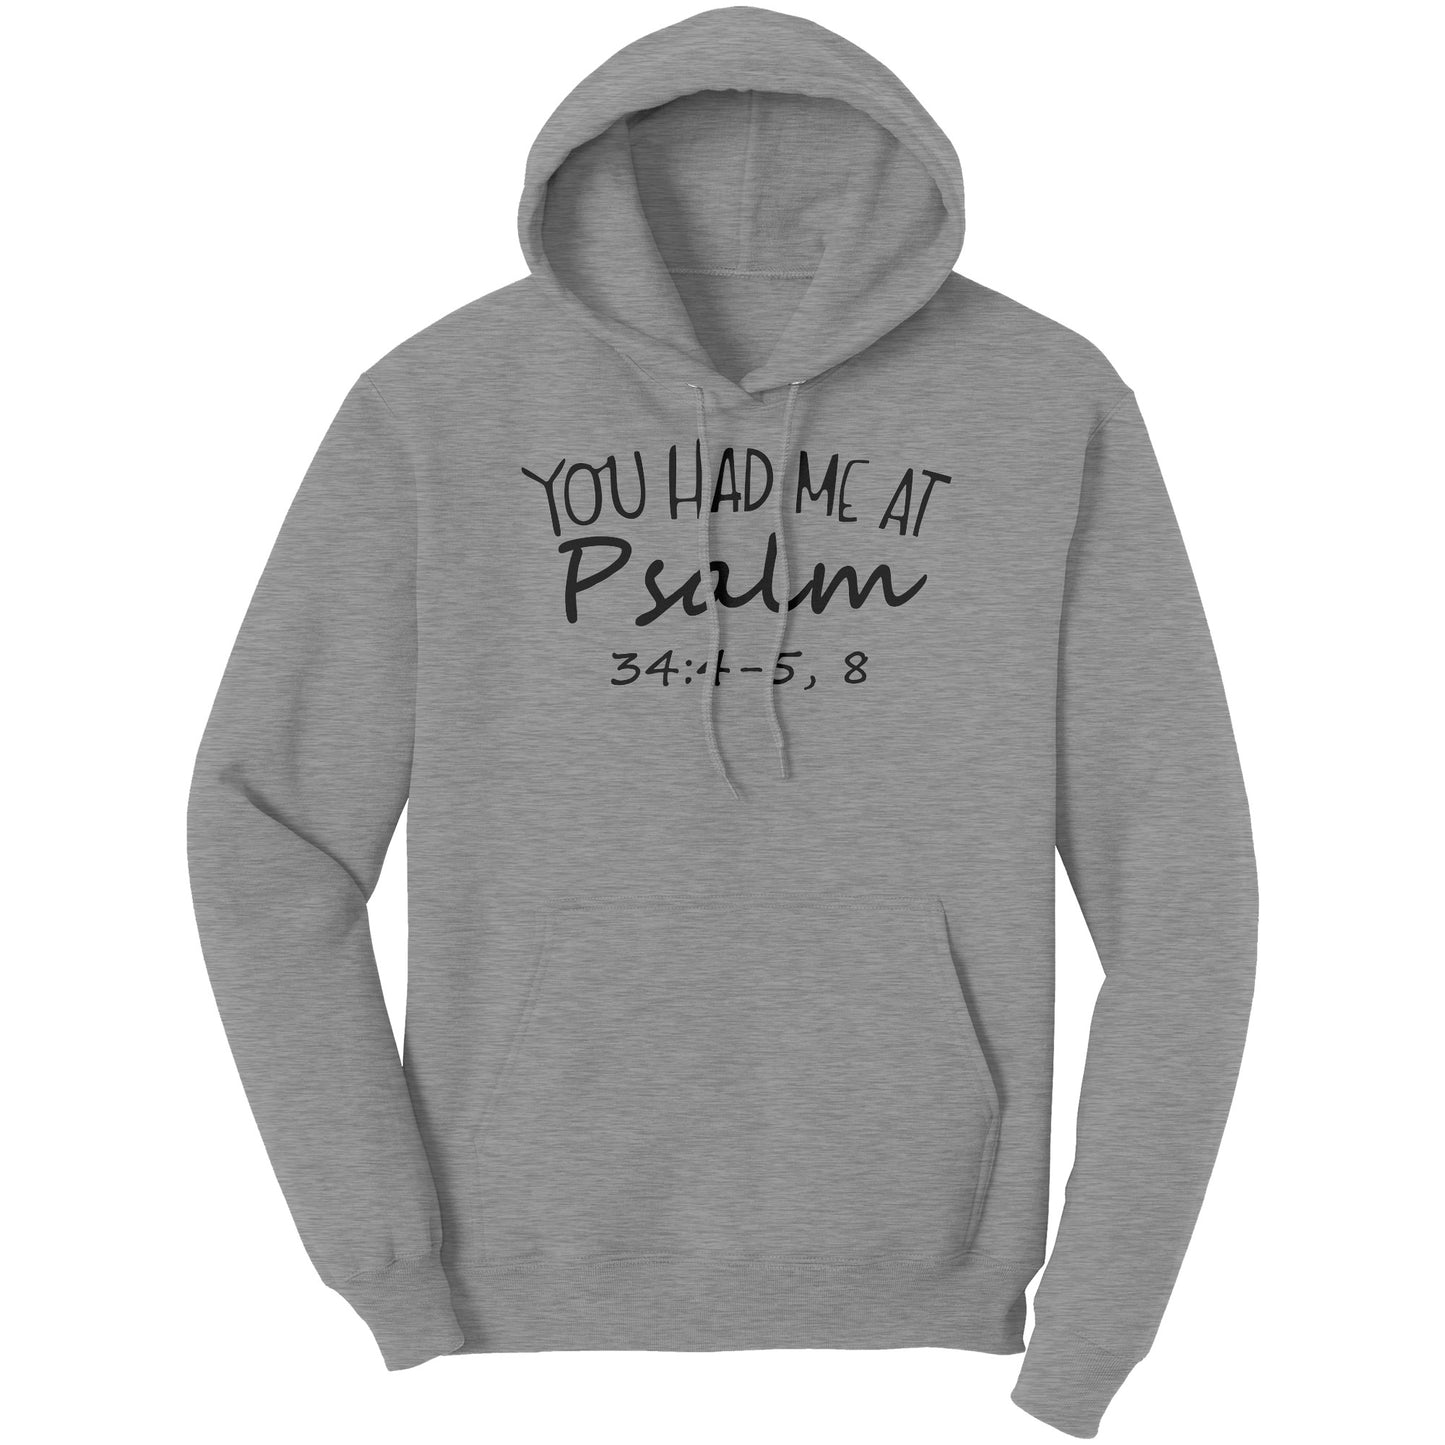 You Had Me At Psalm 34:4-5, 8 Hoodie Part 1